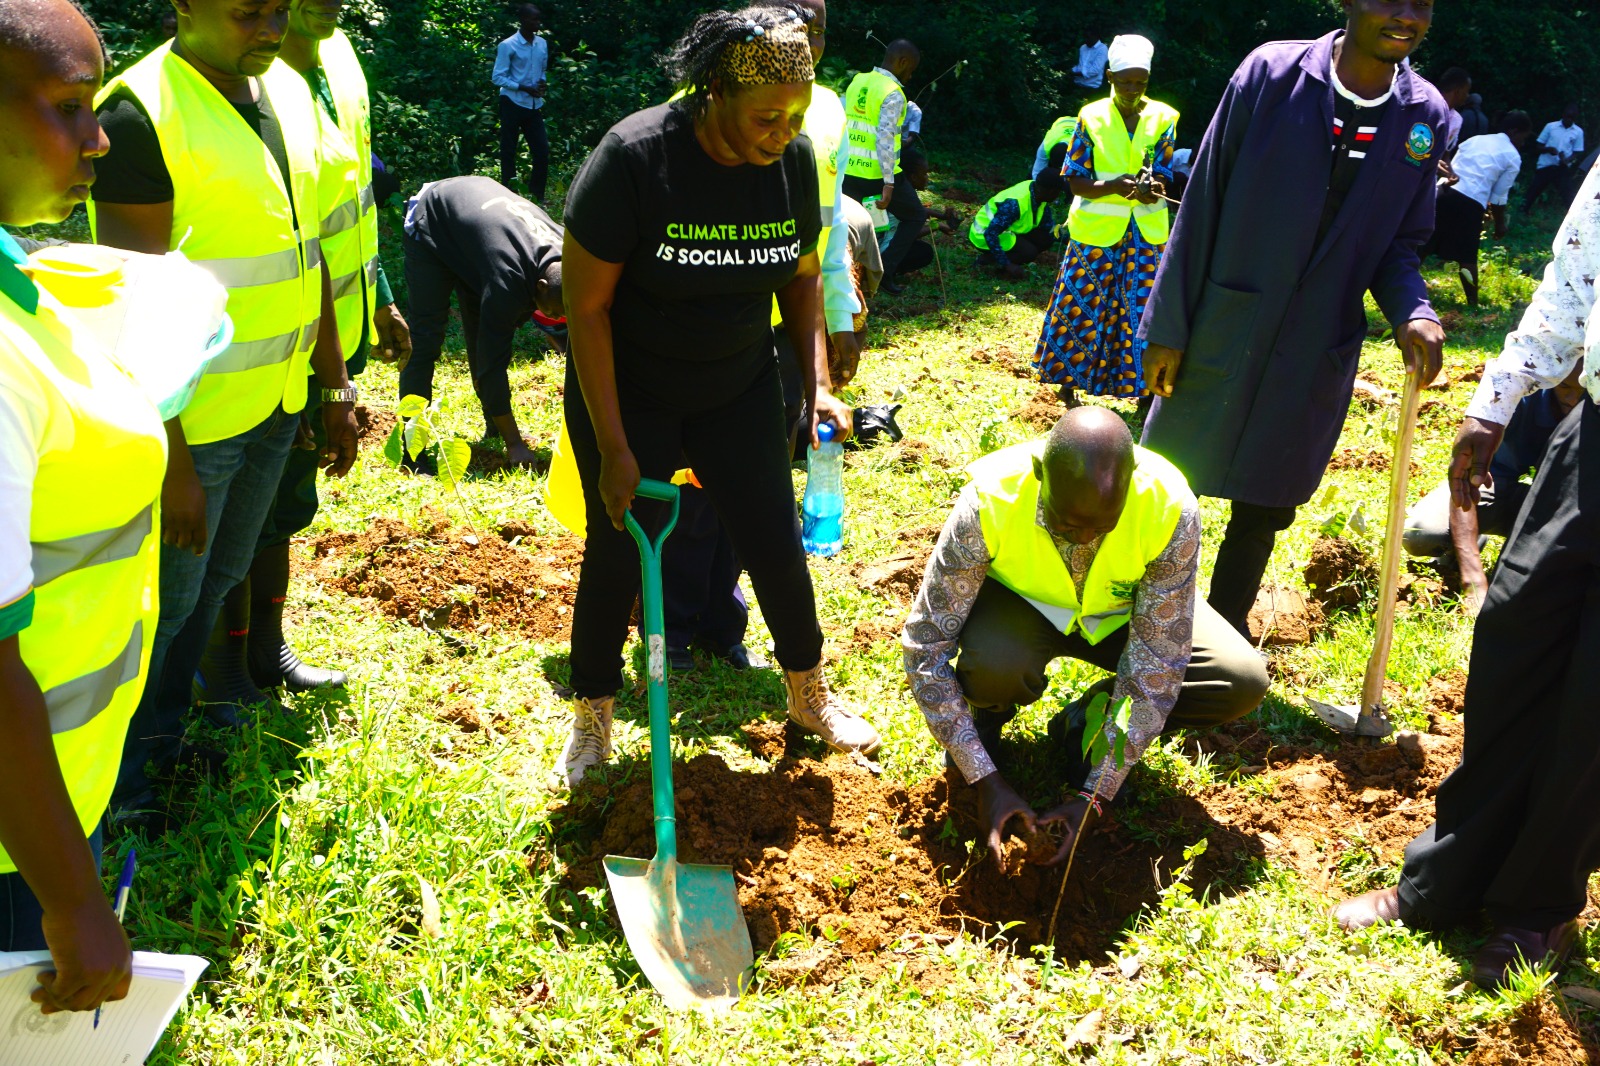 The acting VC planting trees during the drive